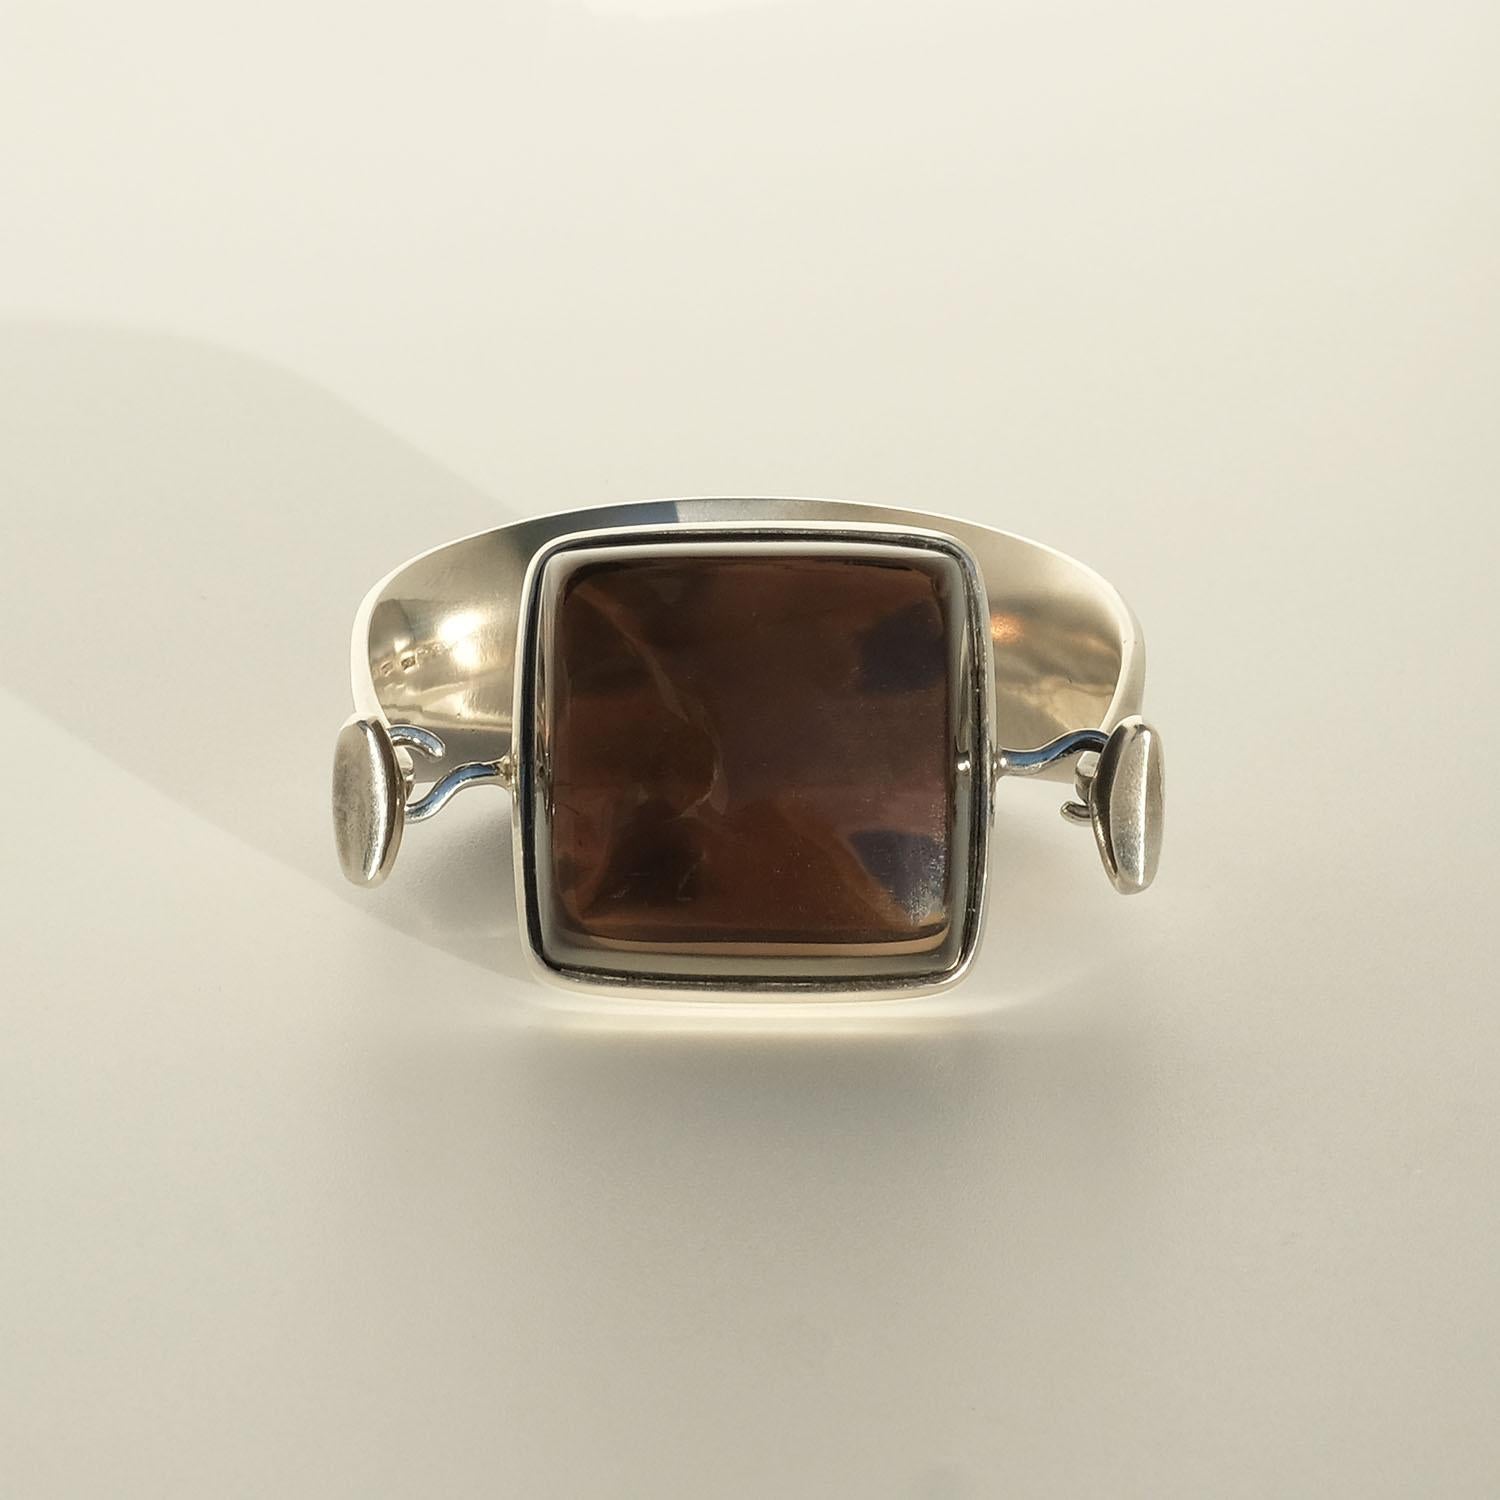 Vivianna Torun Bülow-Hübe (1927-2004) for Georg Jensen (model no 203B). Designed in the 1960s.

This sterling silver fixed bracelet is adorned with a large square smoky quartz stone. The smoky quartz is attached to the bracelet with two hooks of